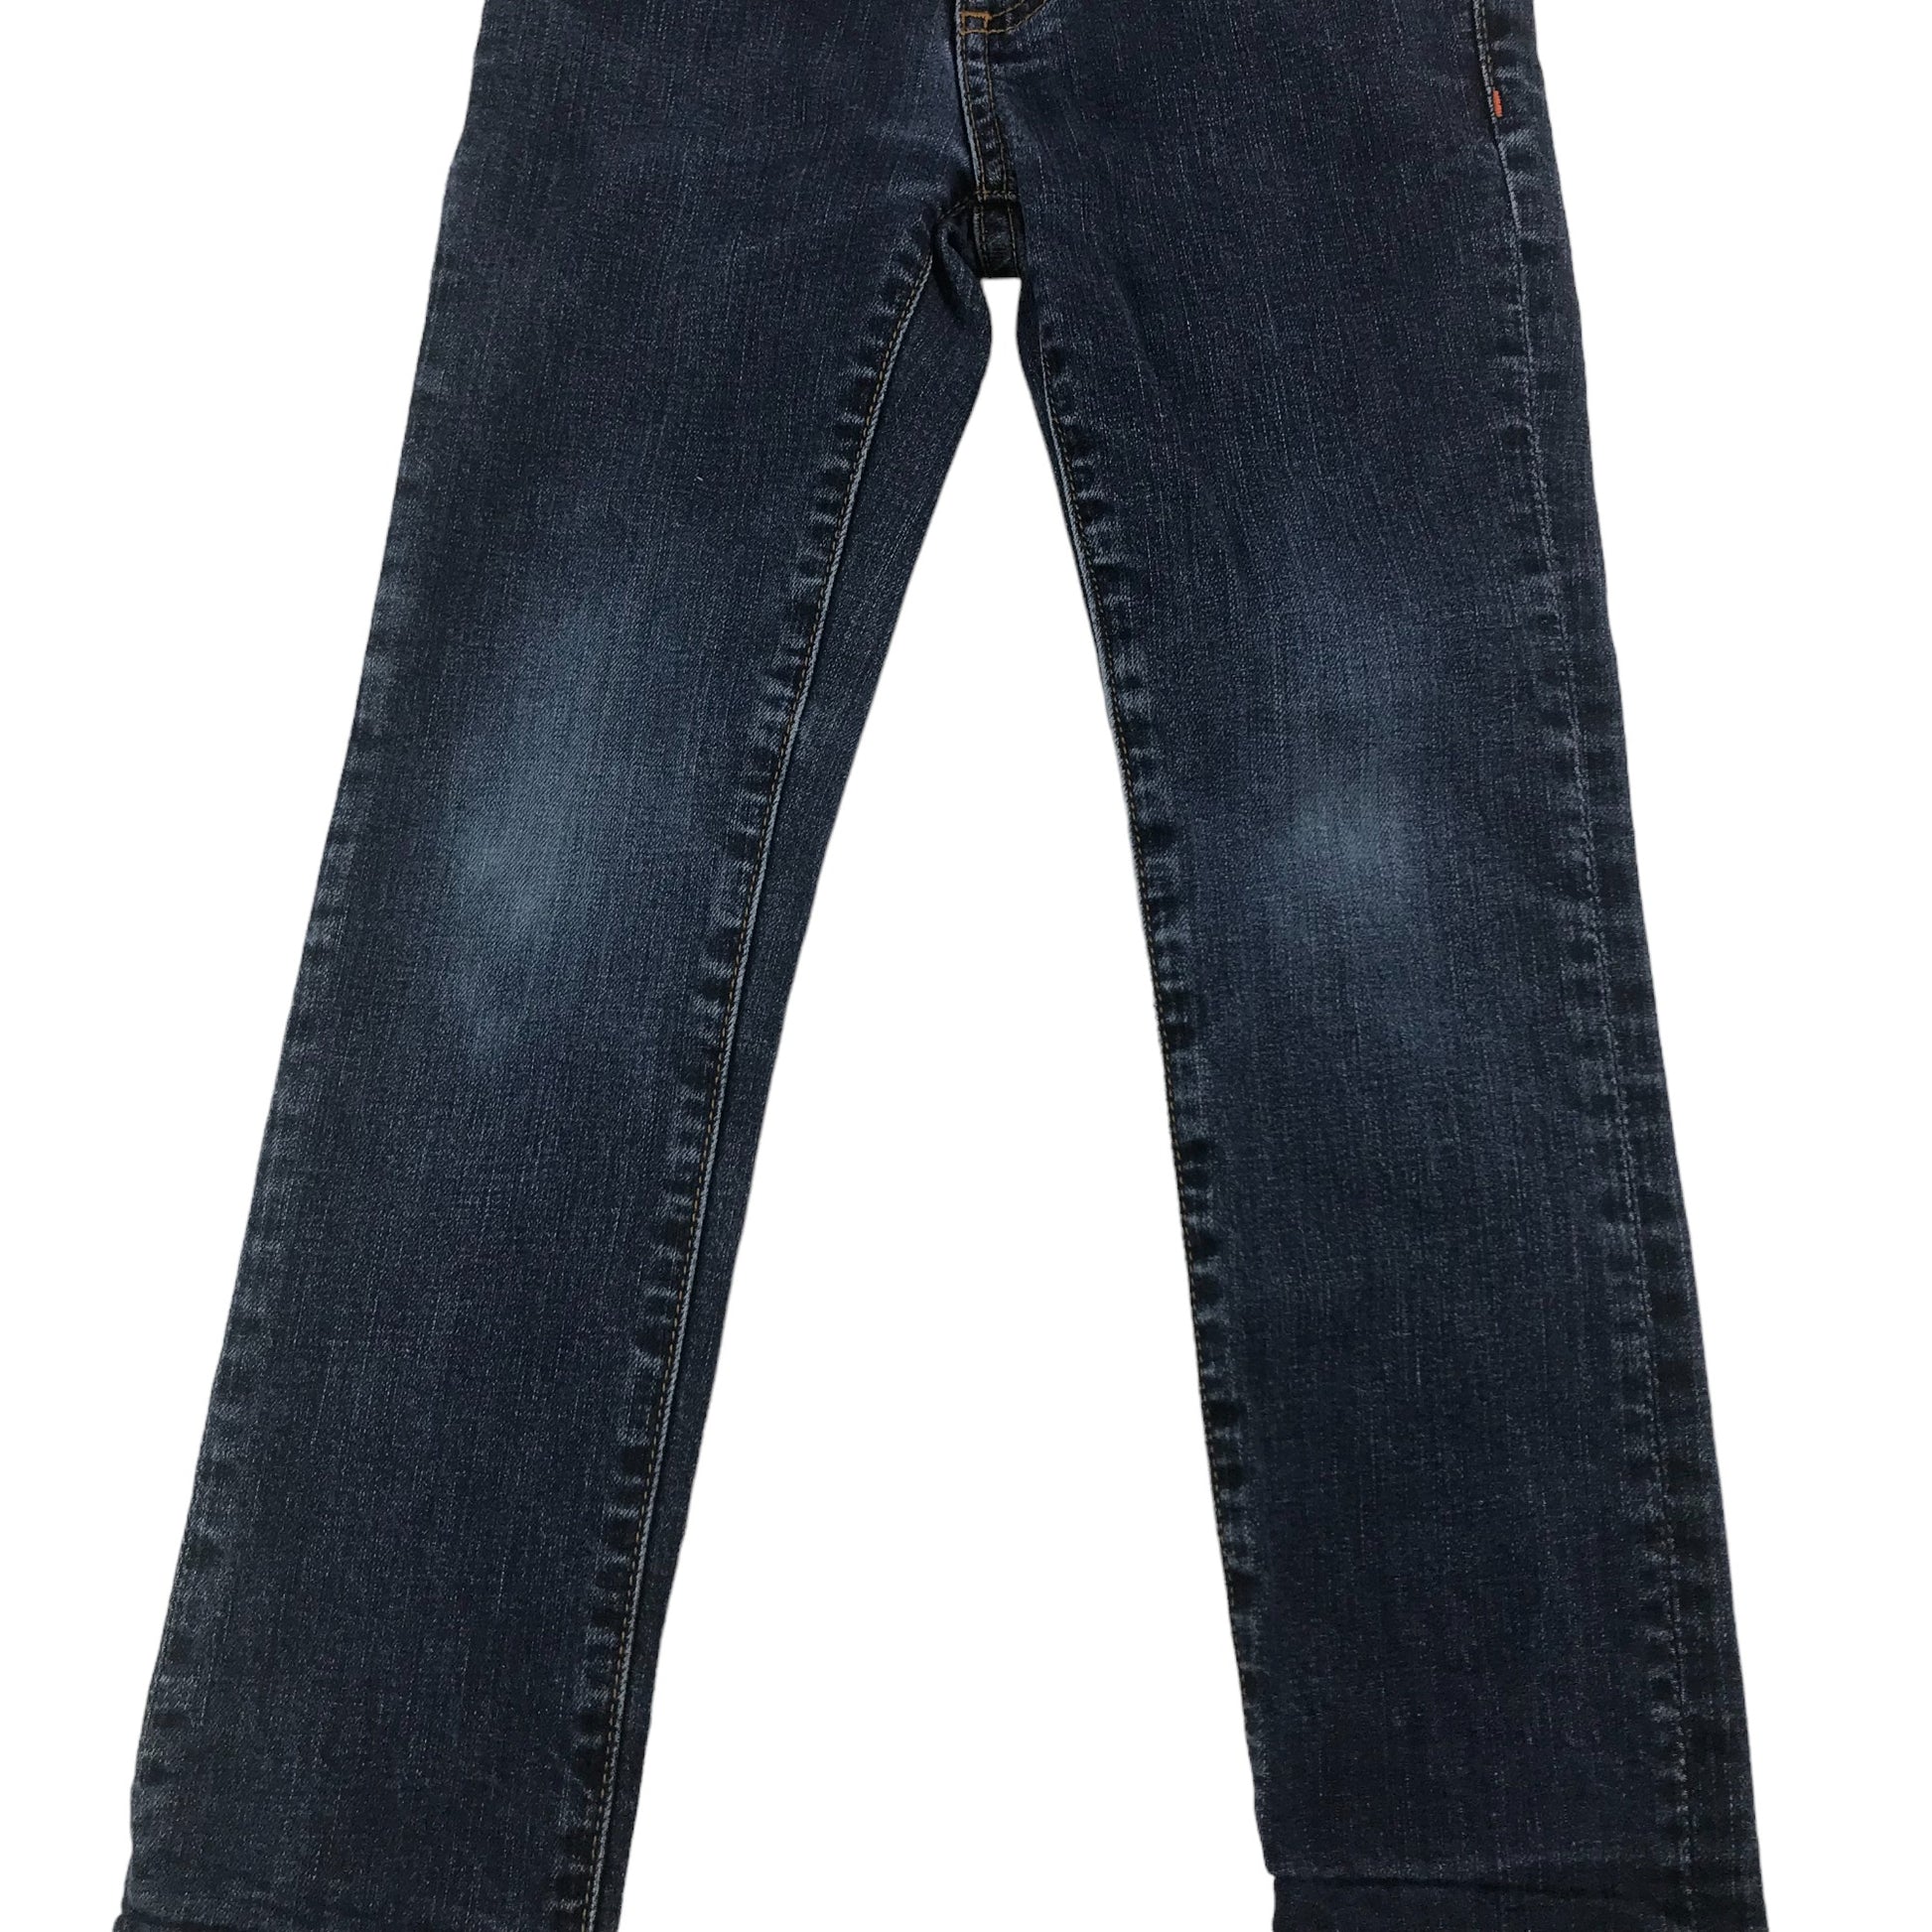 Boden, Jeans